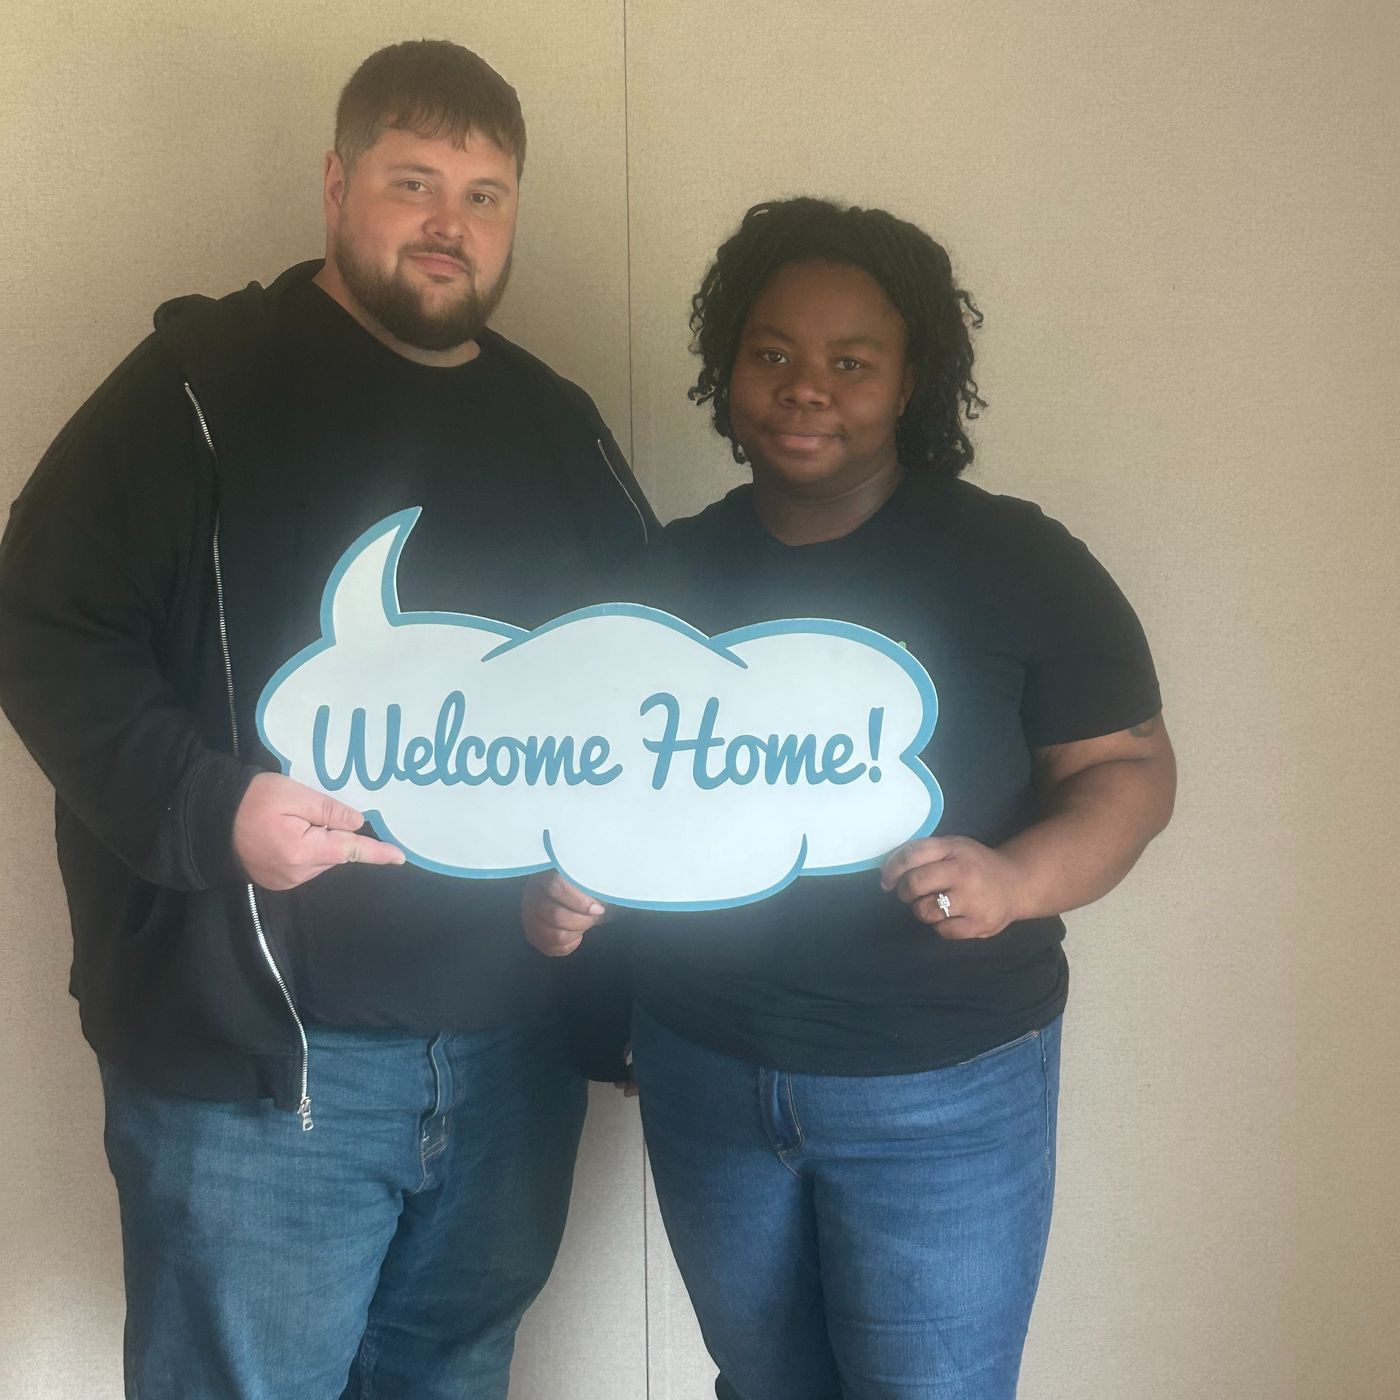 STEPHEN H. welcome home image